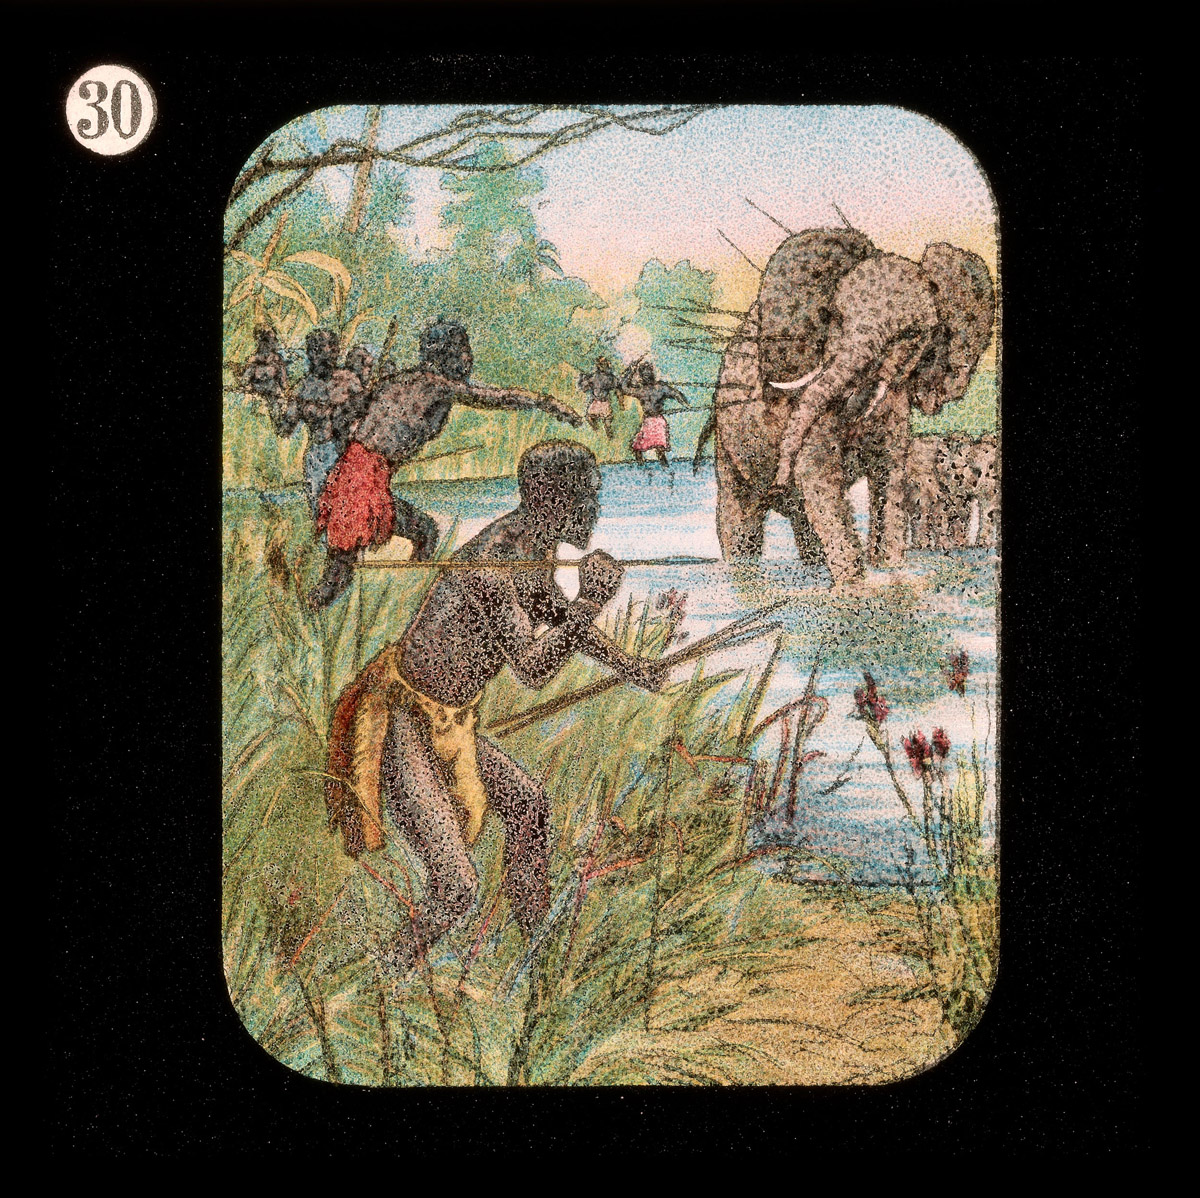 Africans hunting an elephant. Lantern slide from the Life, Adventures, and Work of David Livingstone, date unknown. Courtesy of the Smithsonian Libraries, Washington, D.C